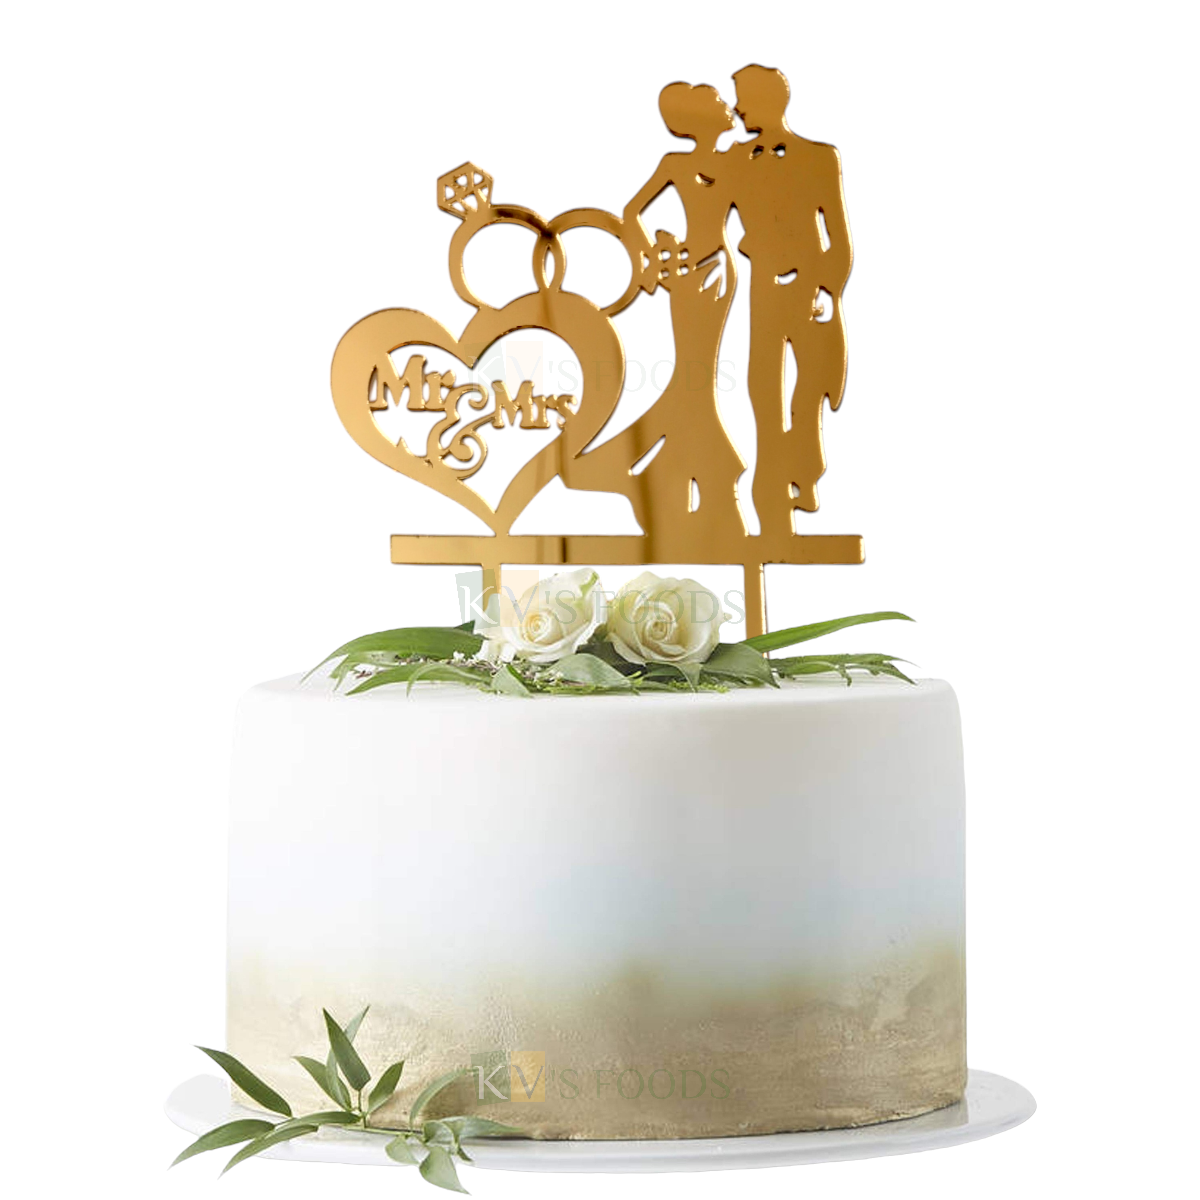 1PC Golden Acrylic Shiny Glass Finish Standing Bride And Groom With Mr & Mrs Inside The Heart Shape With Engagement Rings Cake Topper, Romantic Couples Kissing Cake Insert, Wedding Anniversary Theme